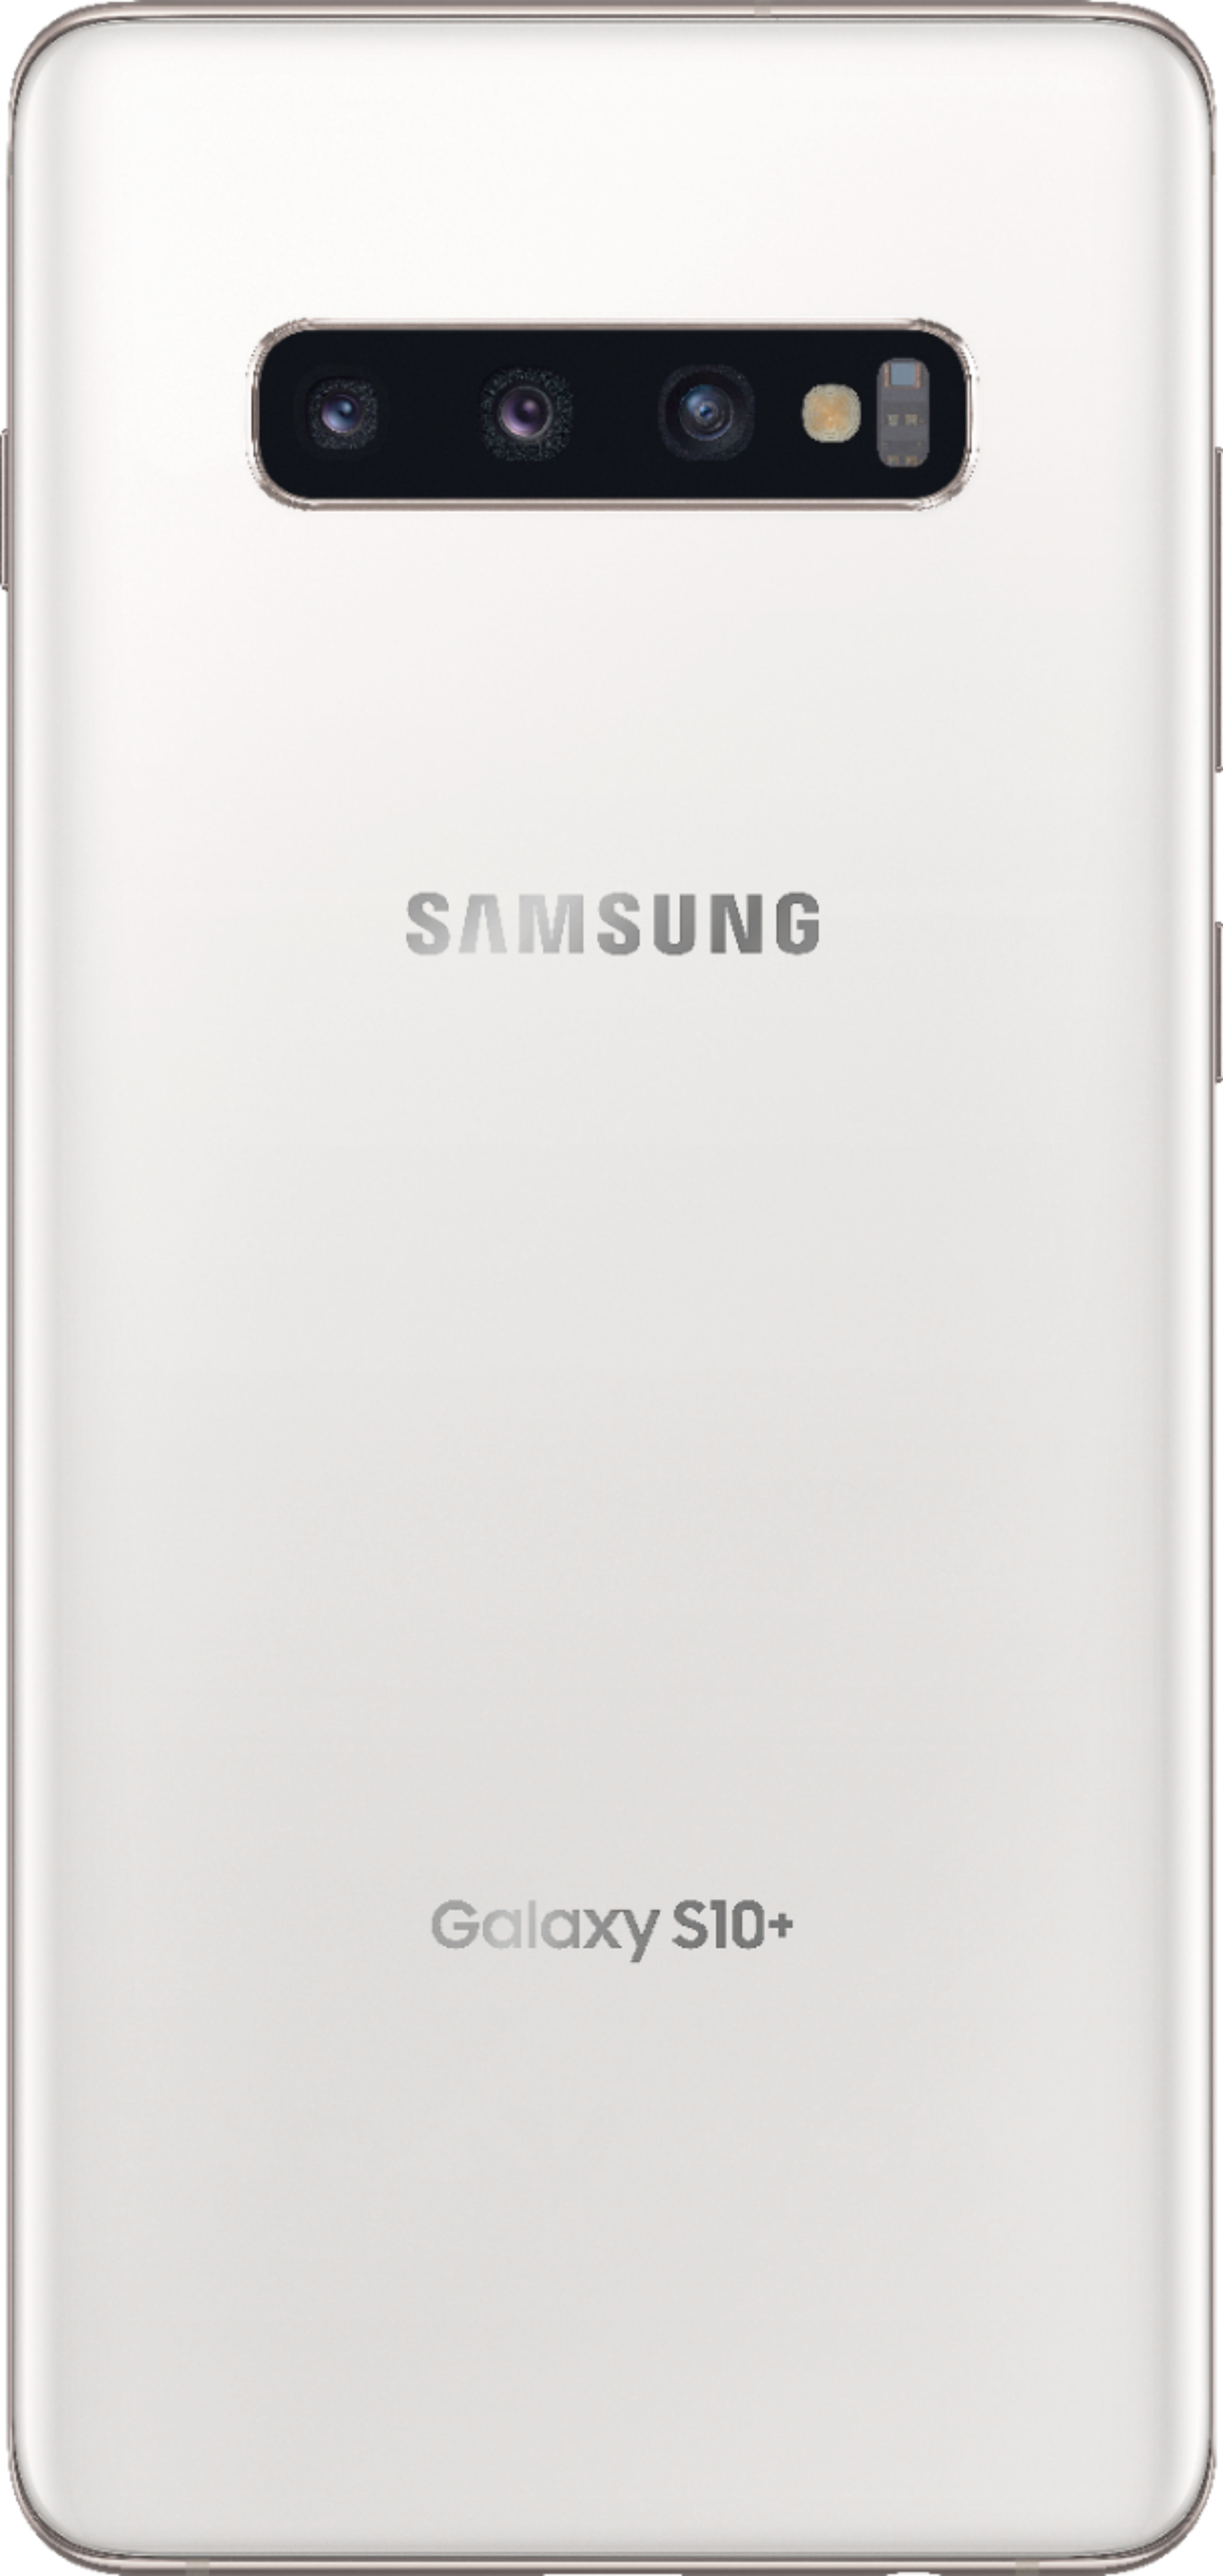 Samsung Galaxy S10 With 1tb Memory Cell Phone Ceramic White